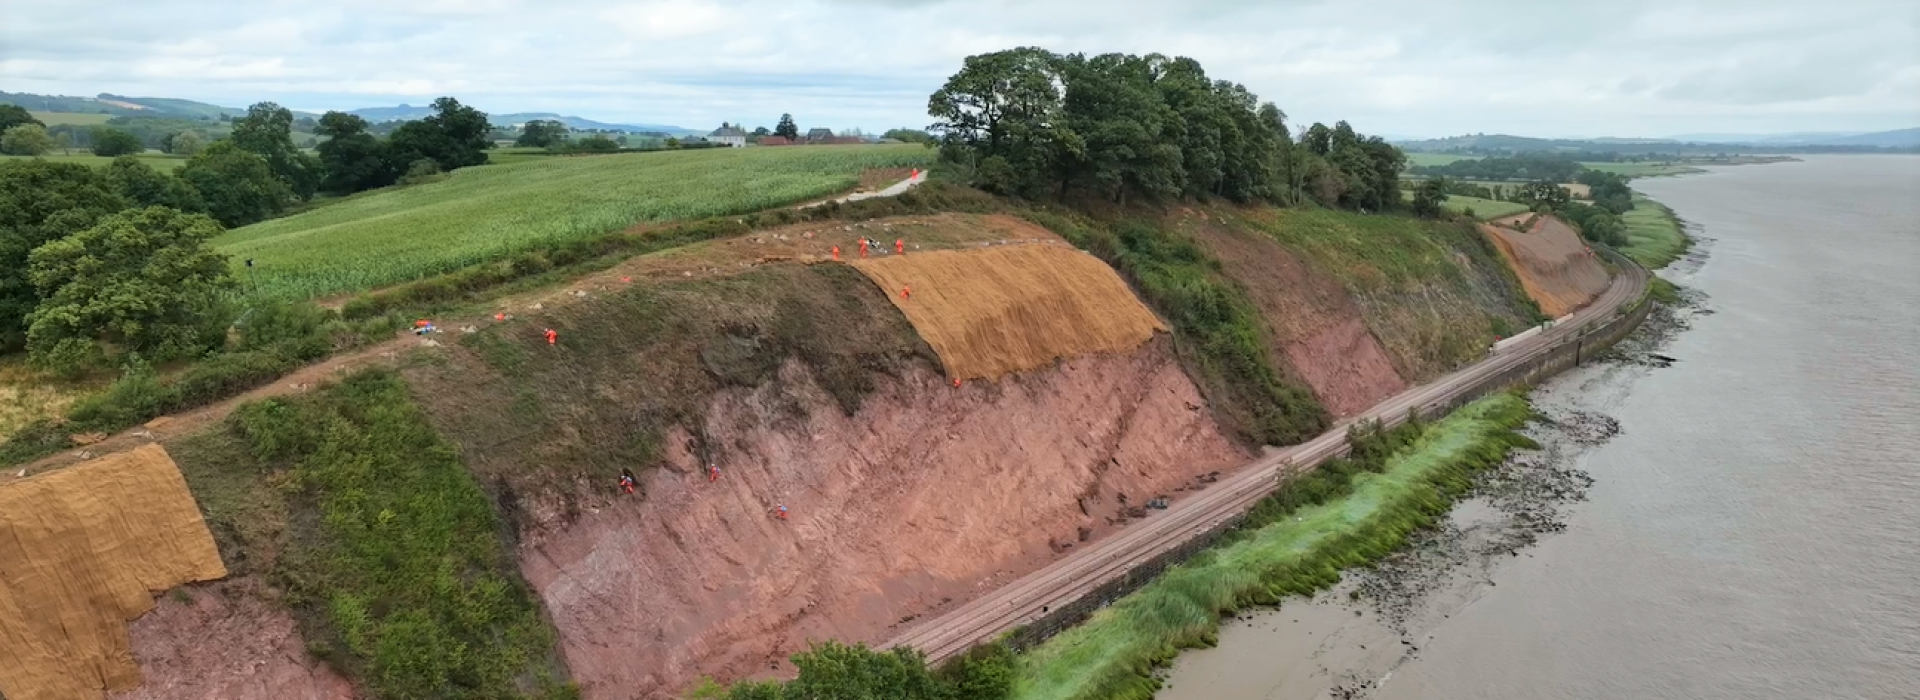 Over 60,000 Hours Completed on the Severn Estuary Programme